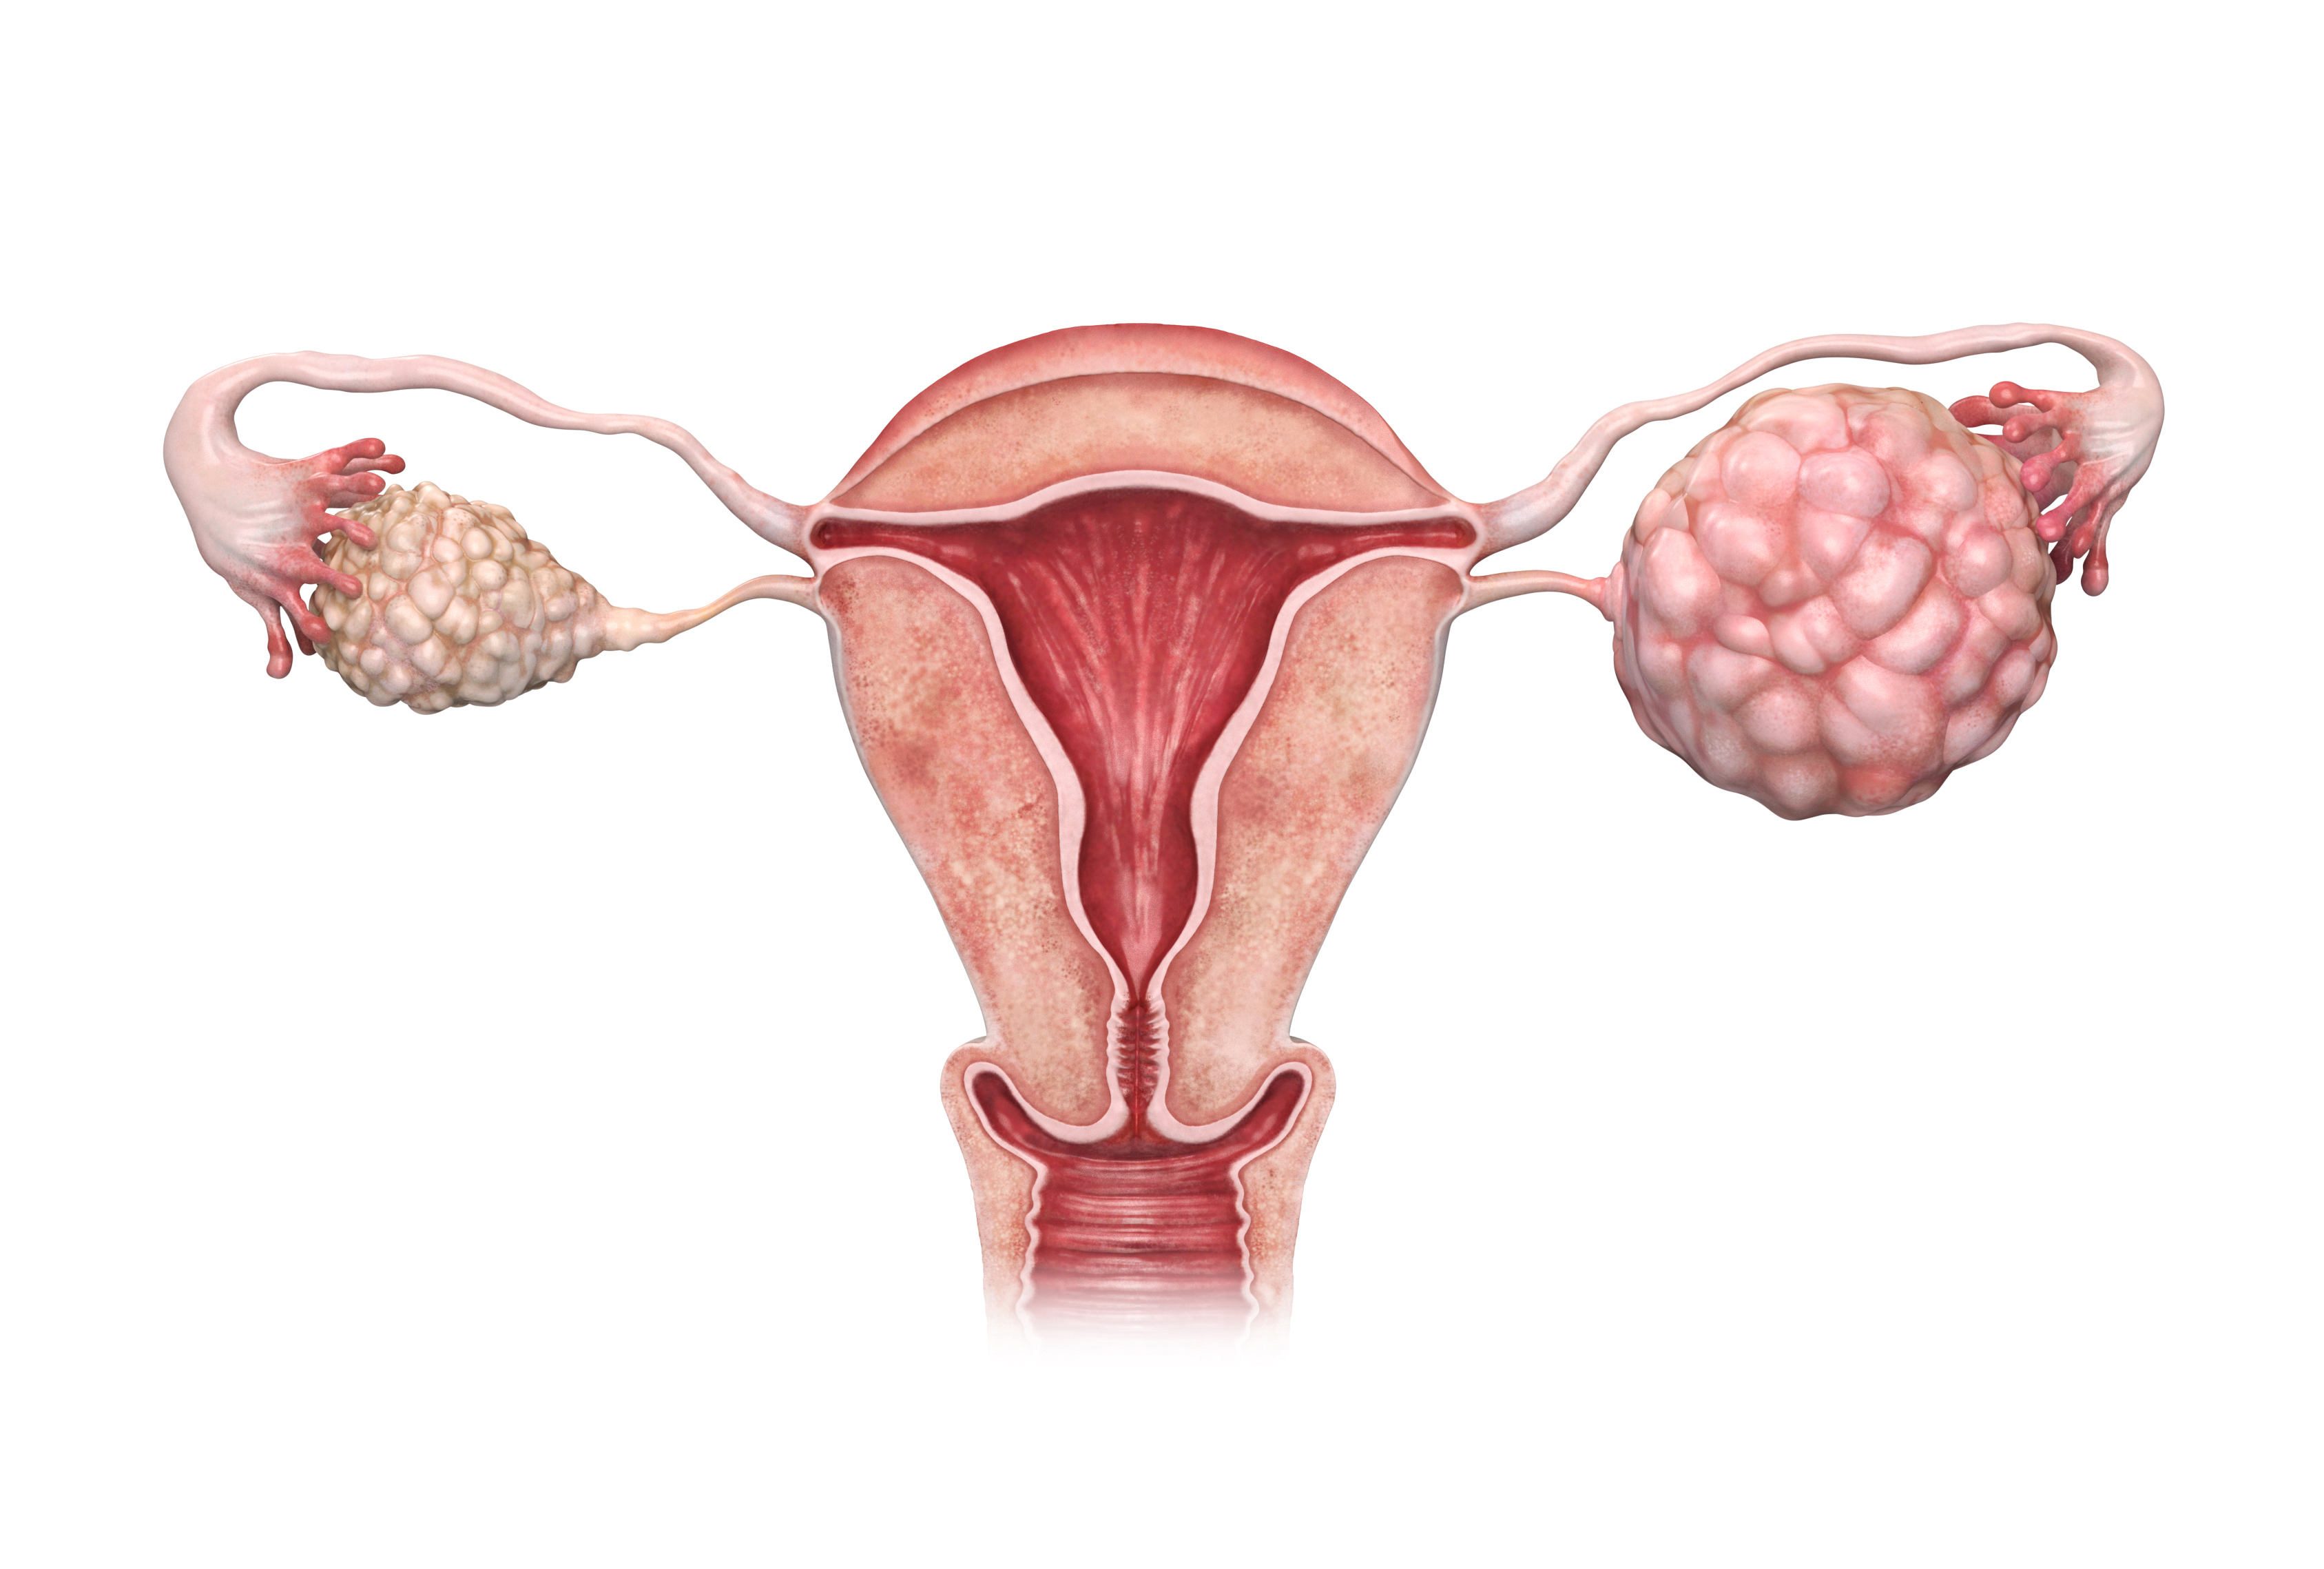 Ovarian Cancer Cells' Dependence on Fat Suggests New Therapeutic Target